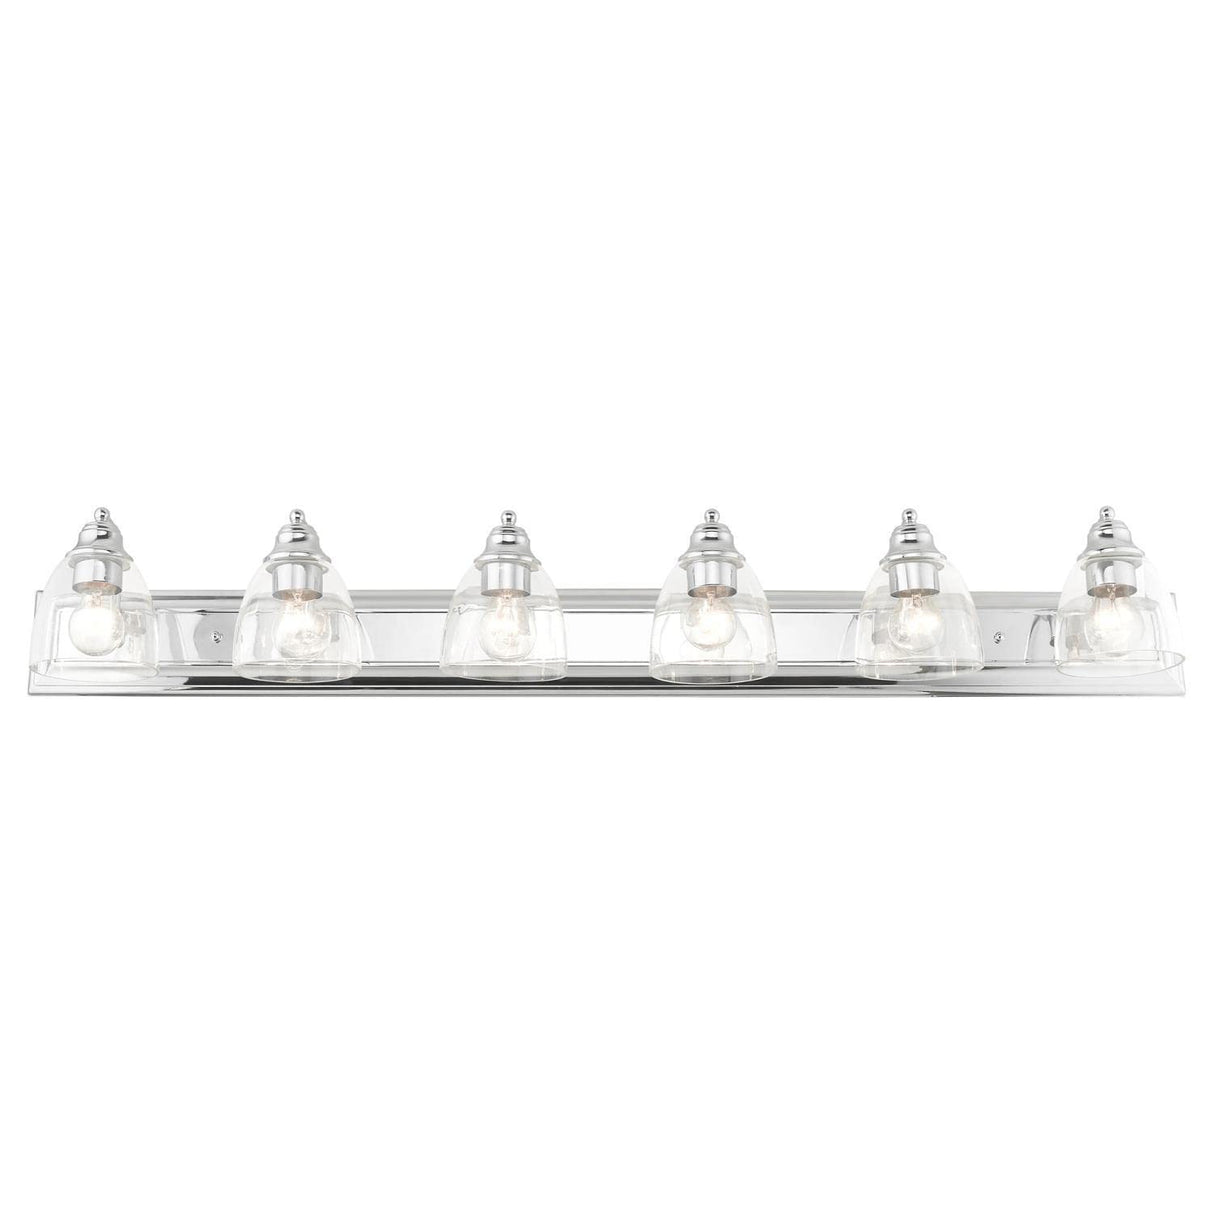 Livex Lighting 17076-05 Birmingham Collection 6-Light Bathroom Vanity Light with Clear Glass, Polished Chrome